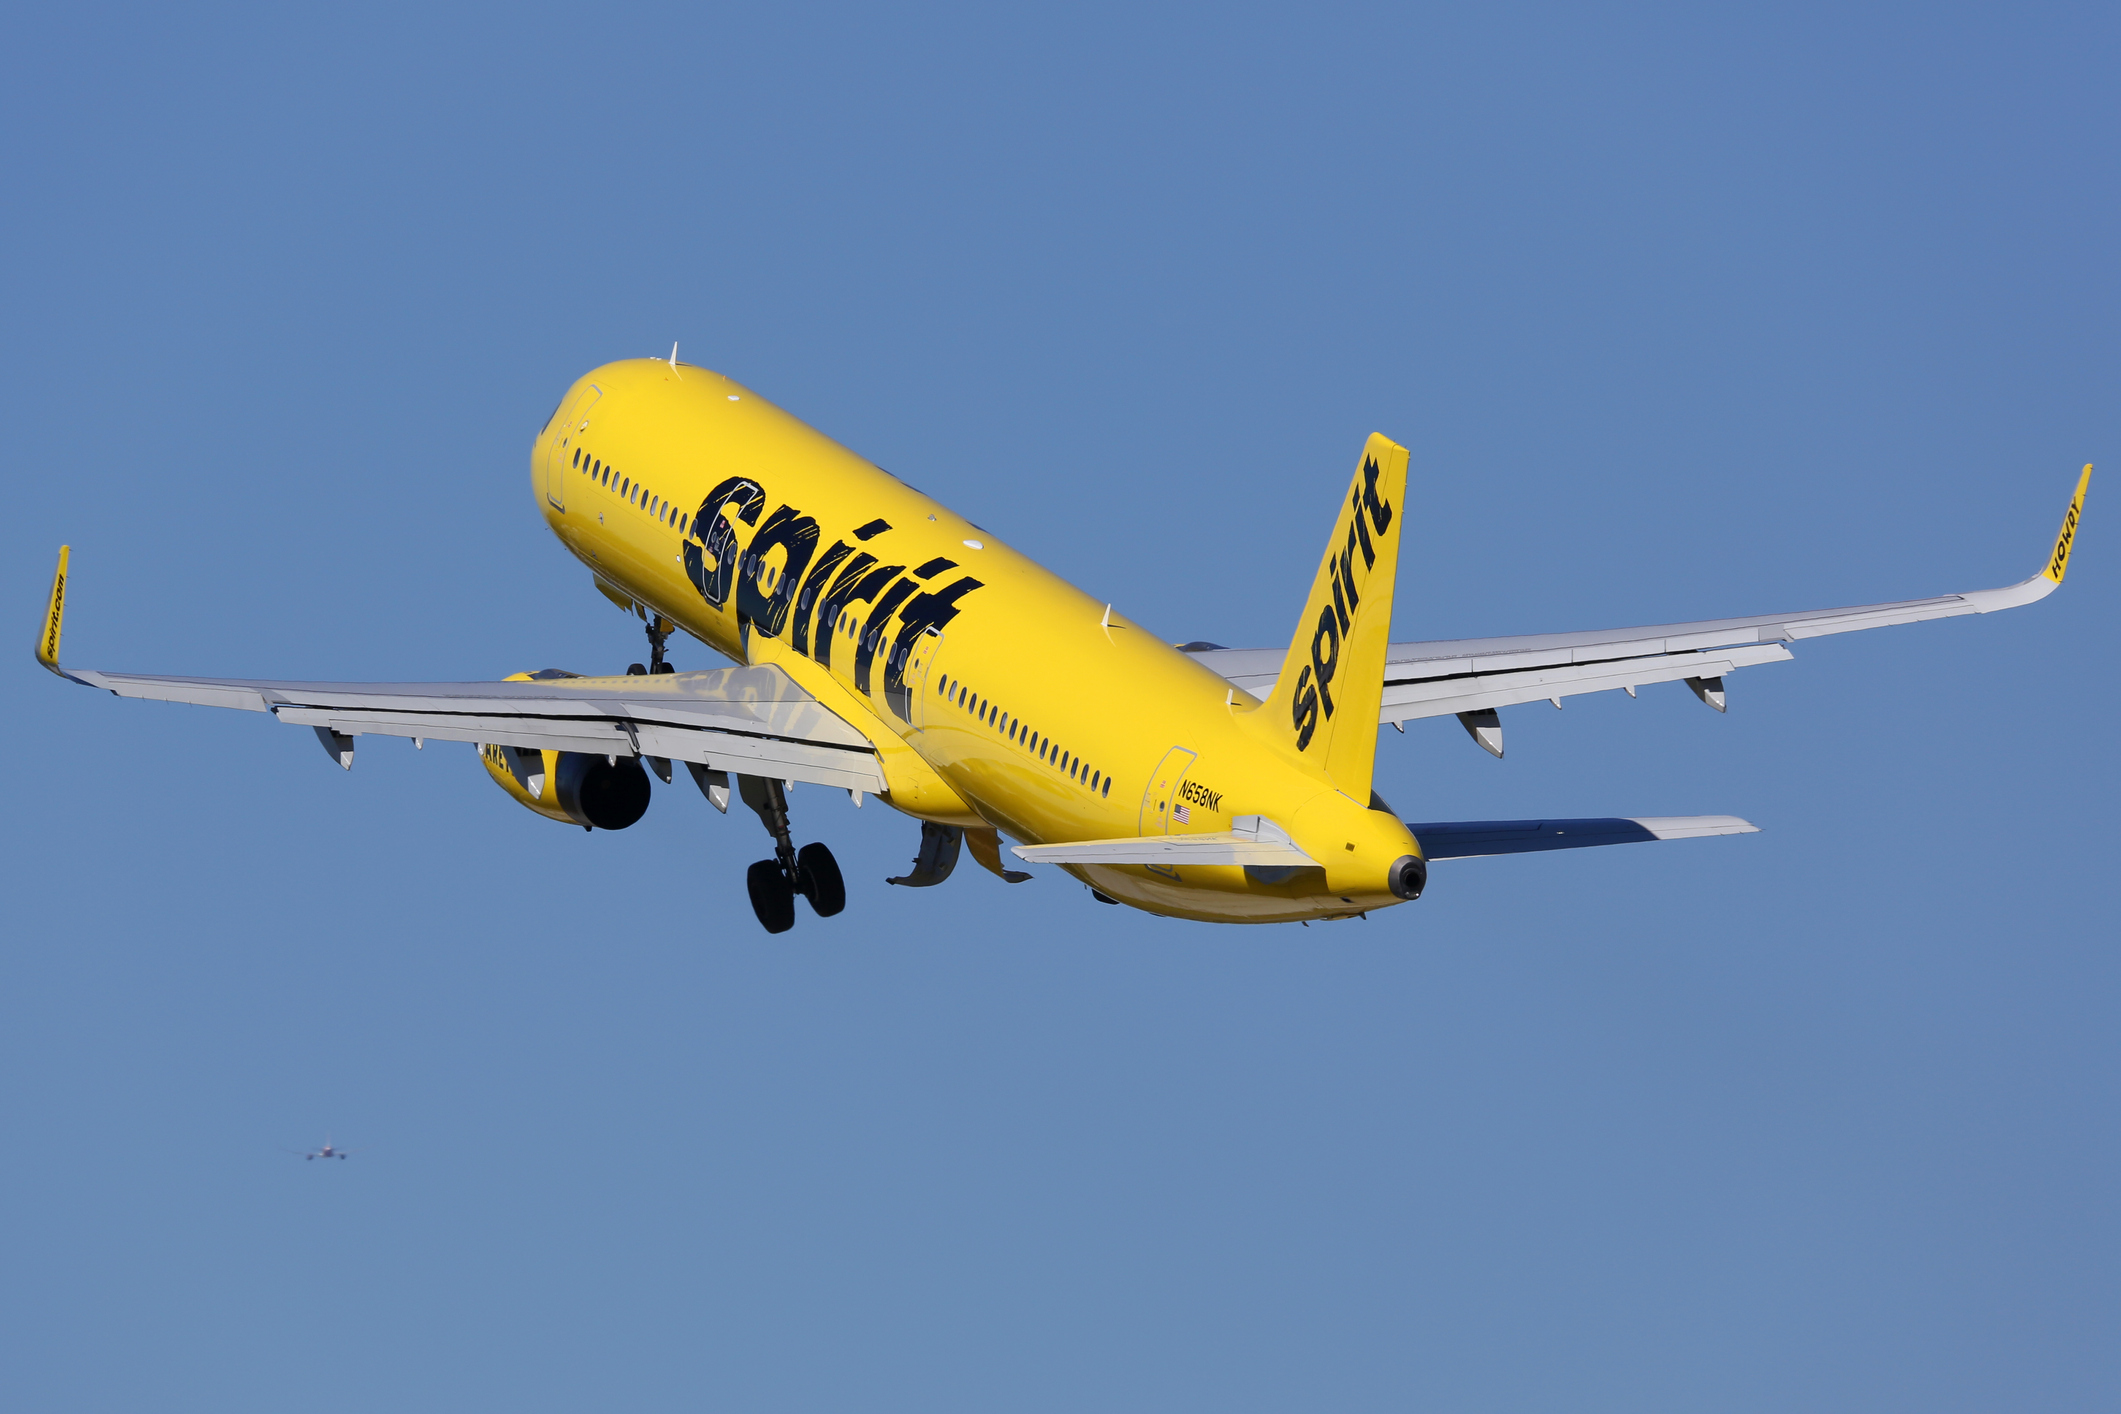 Spirit Airlines Plane Had To Make An Emergency Landing After A Wild